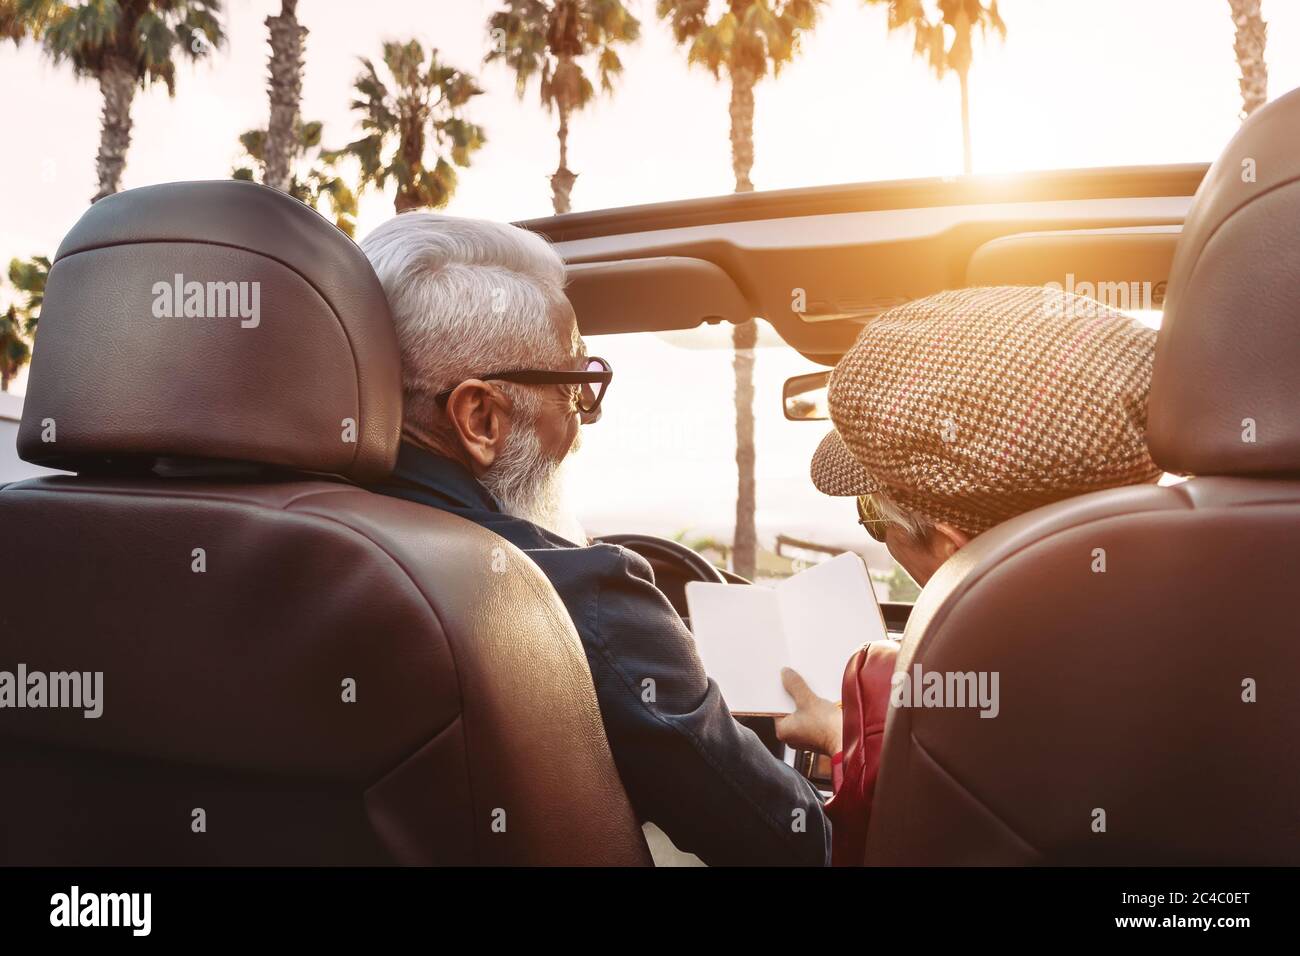 Happy senior couple having fun on new convertible car - Mature people enjoying time together during road trip vacation Stock Photo